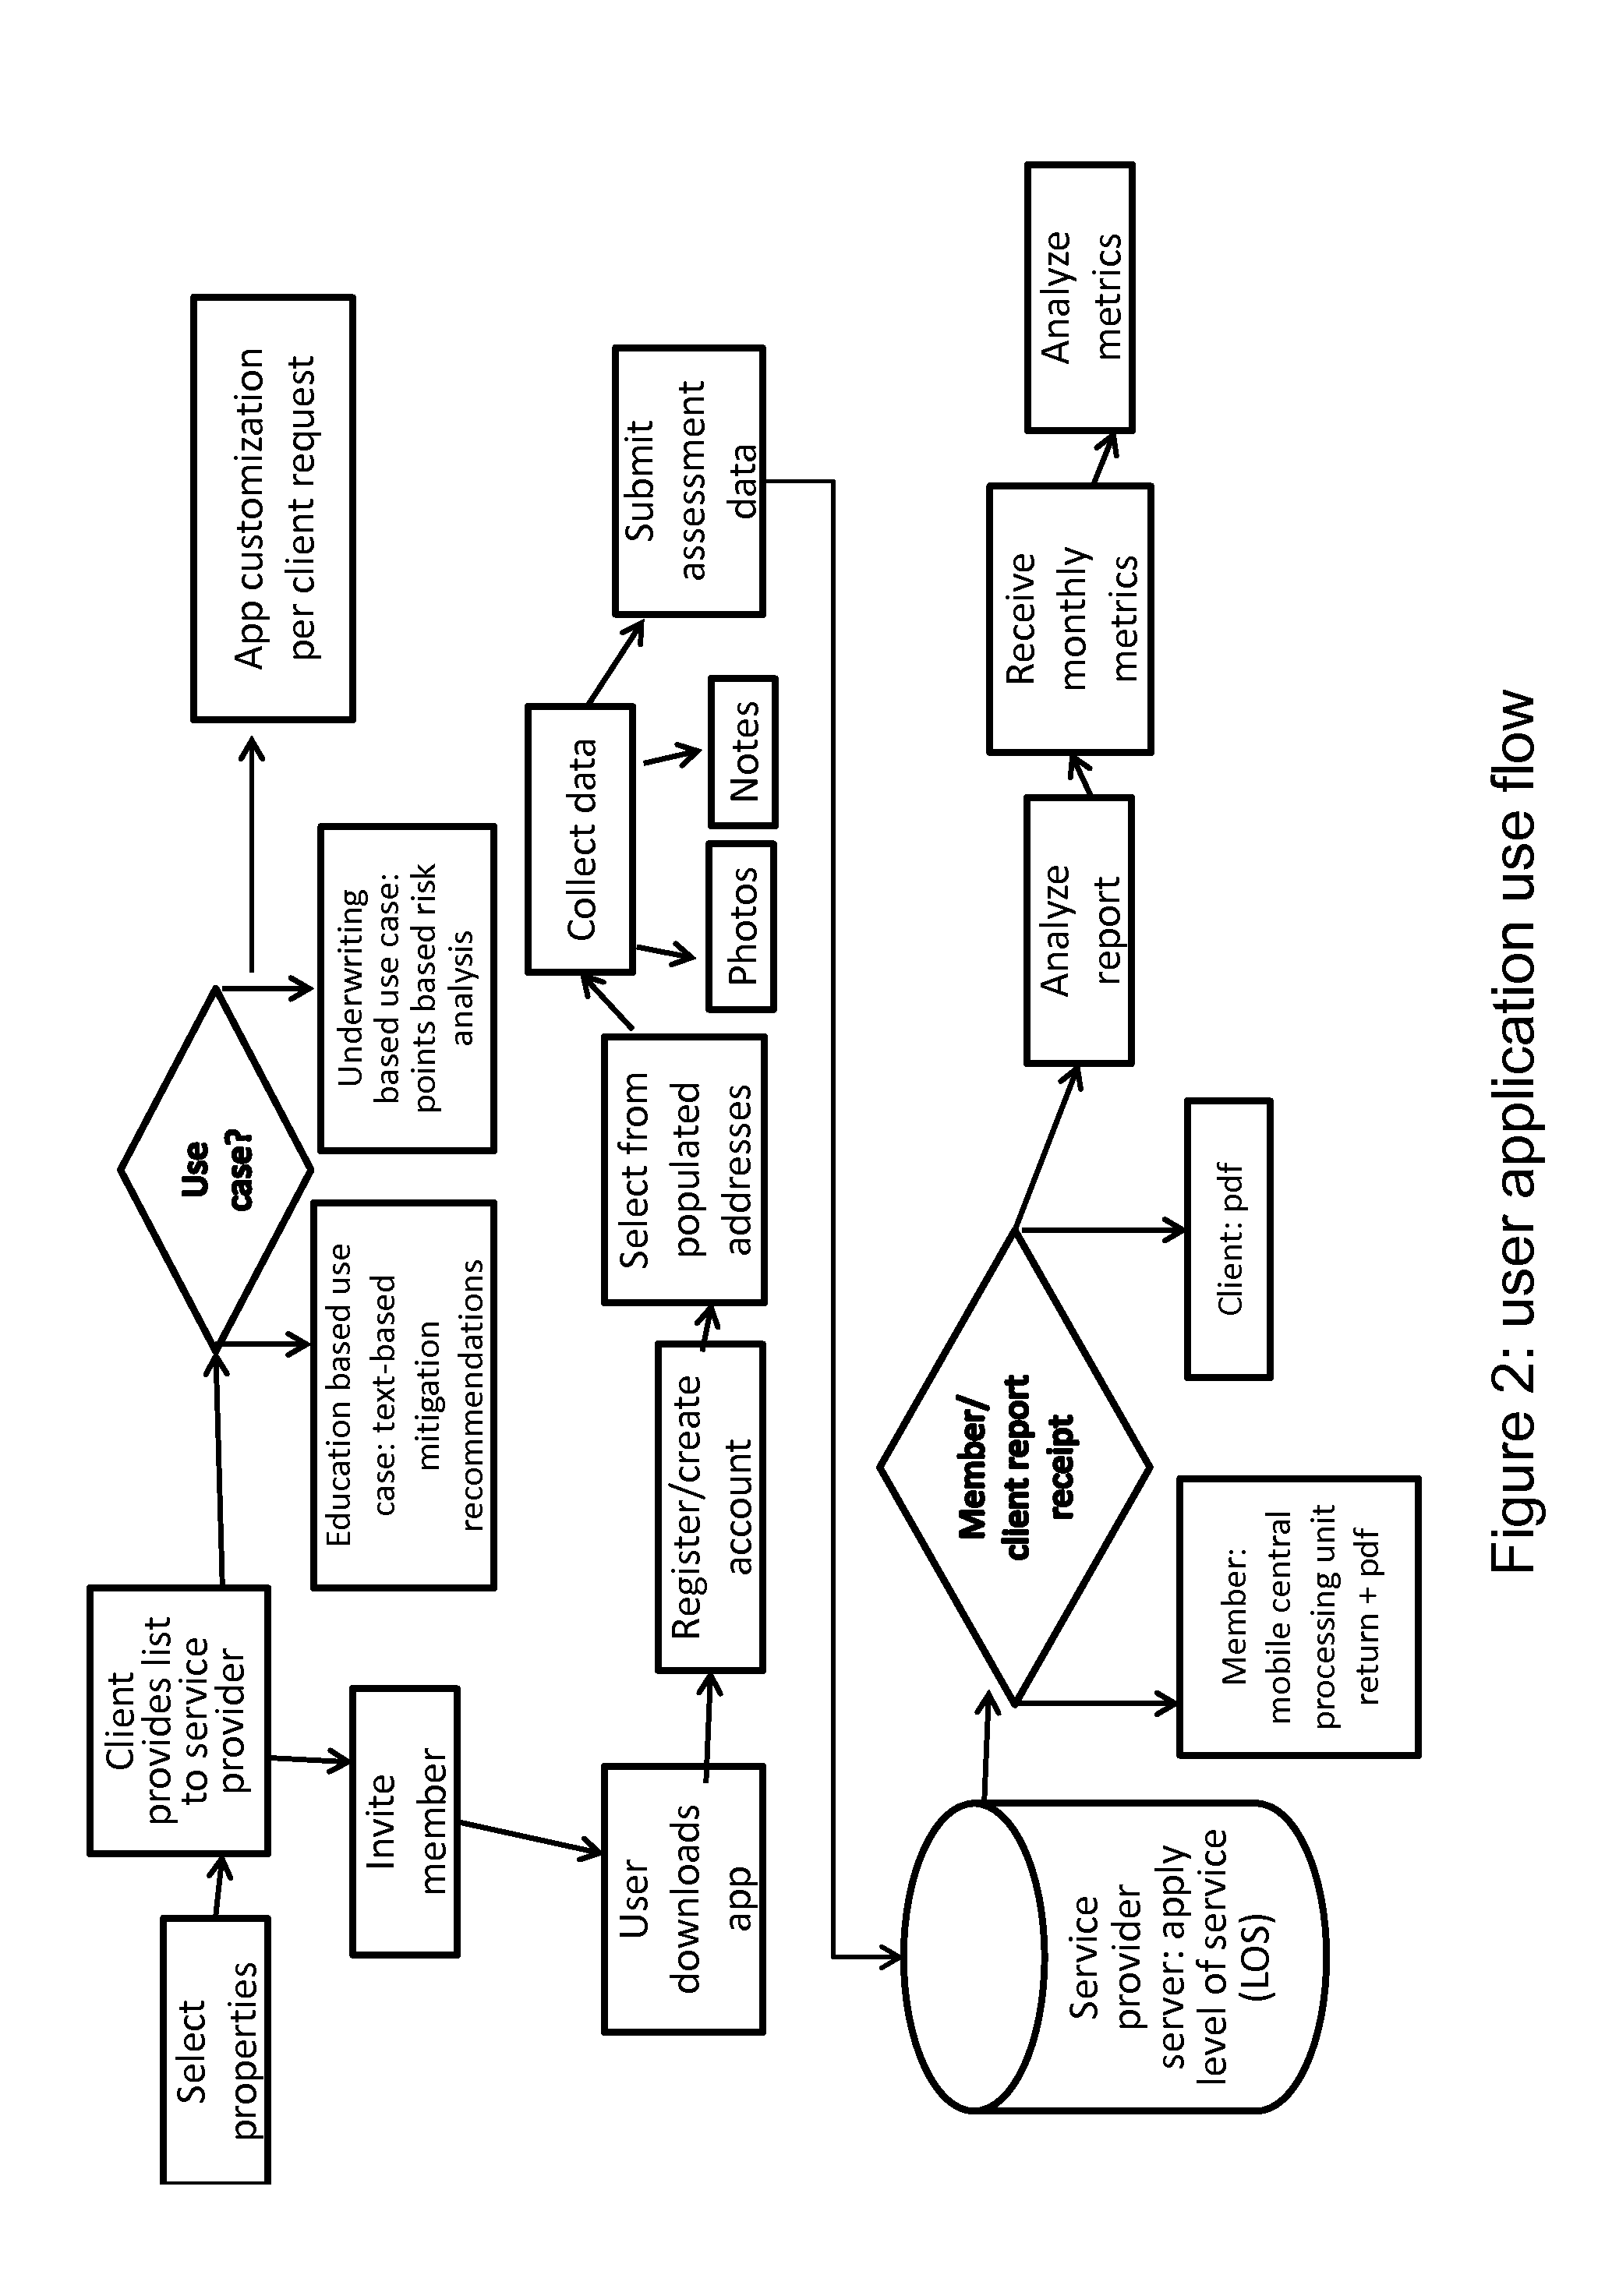 System and method for collecting and assessing wildfire hazard data*